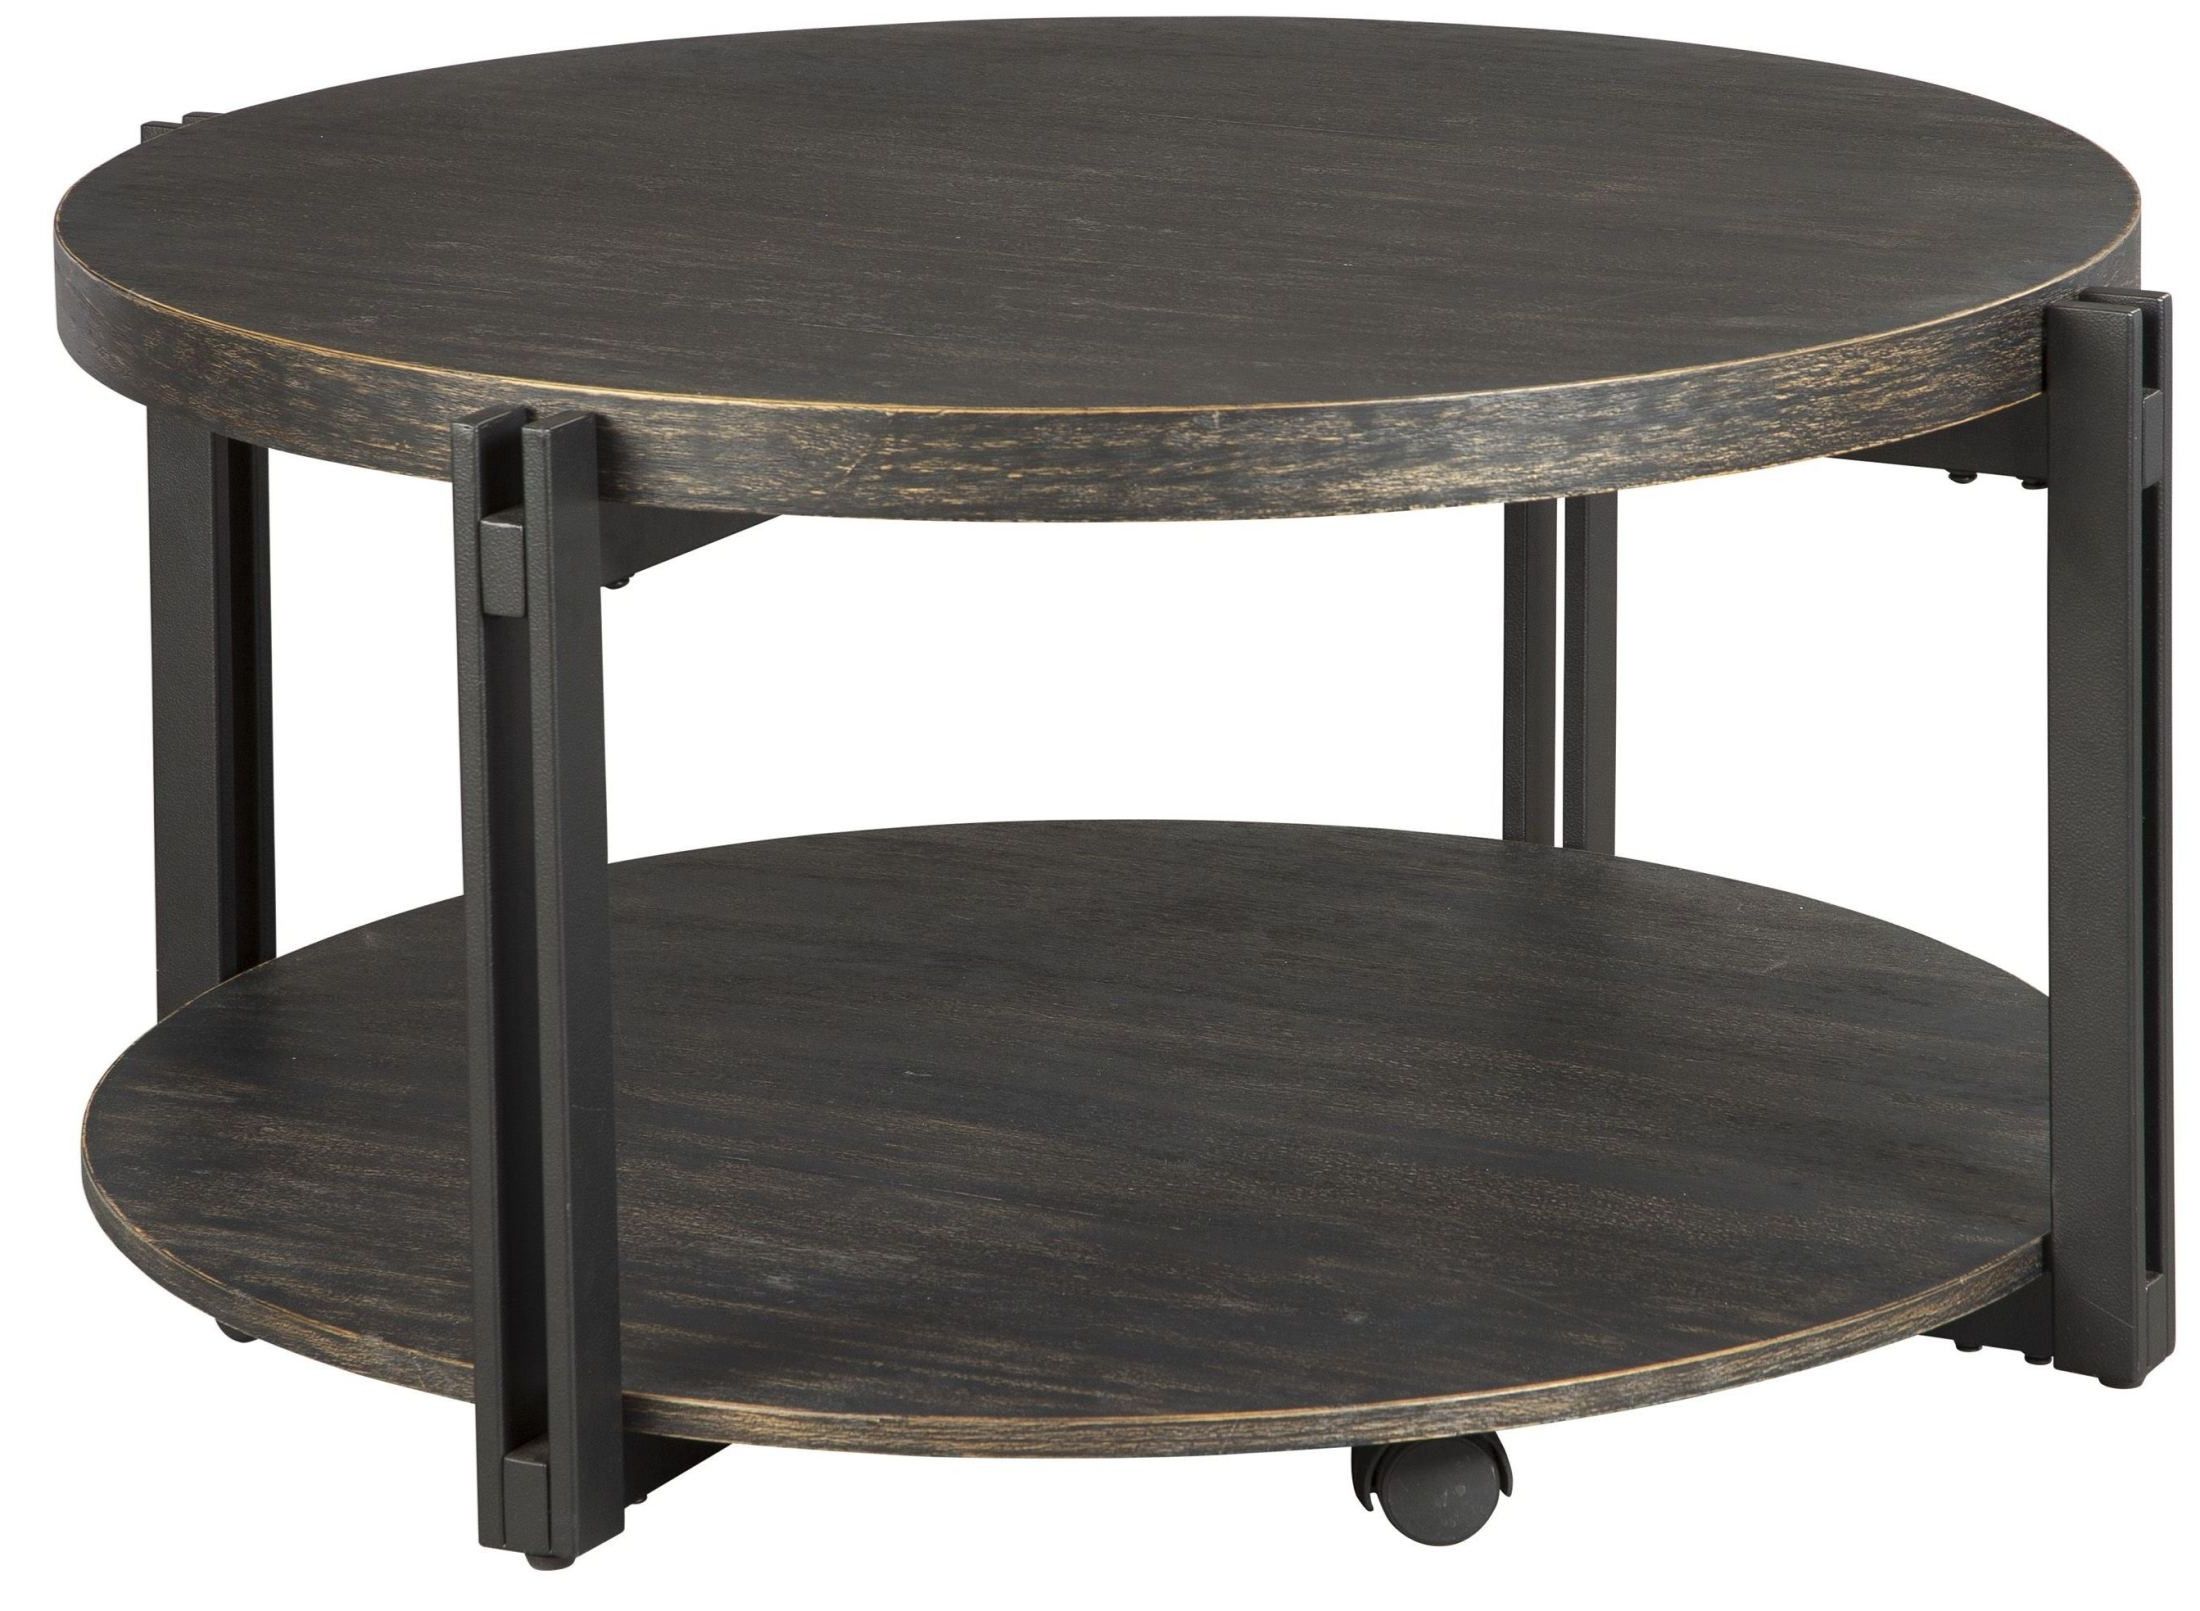 Winnieconi Black Round Cocktail Table, T857 8, Ashley Intended For Most Recent Round Cocktail Tables (View 5 of 20)